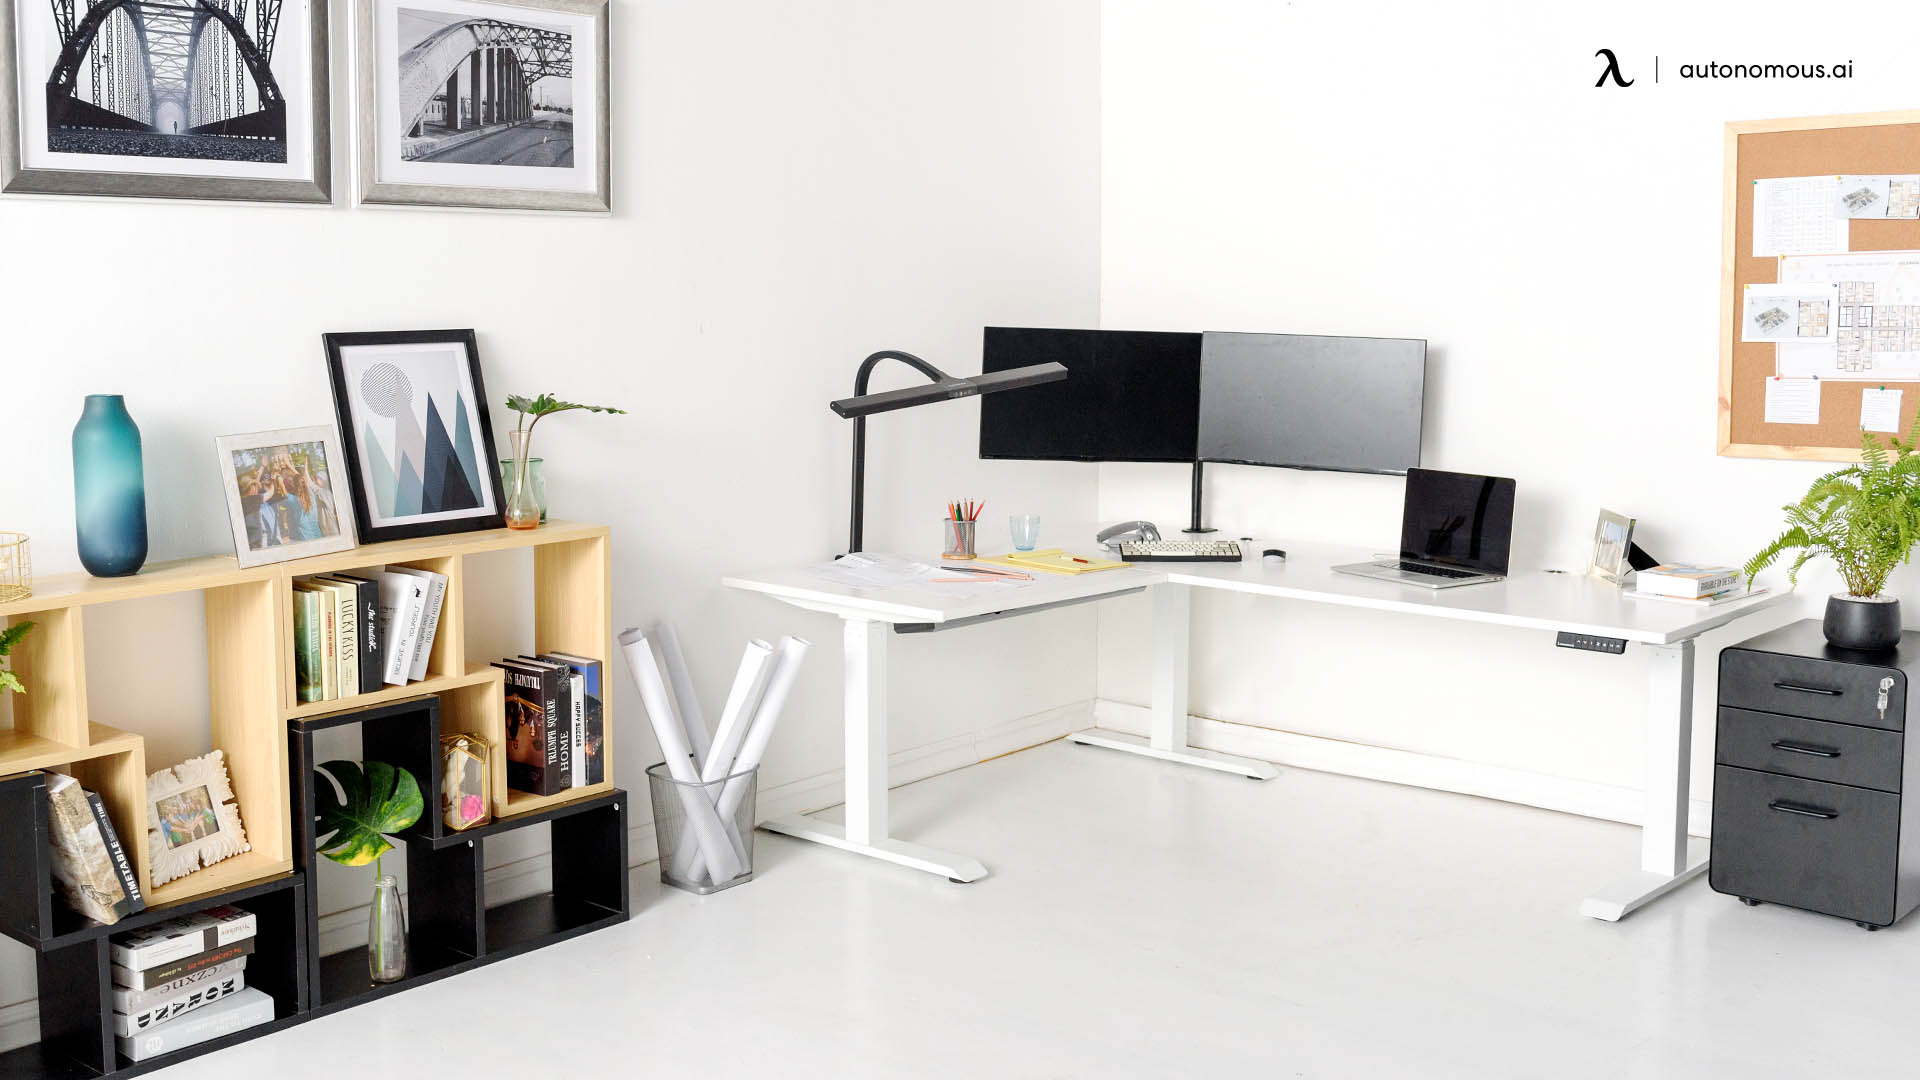 The location of the desk in L-shaped desk office layout